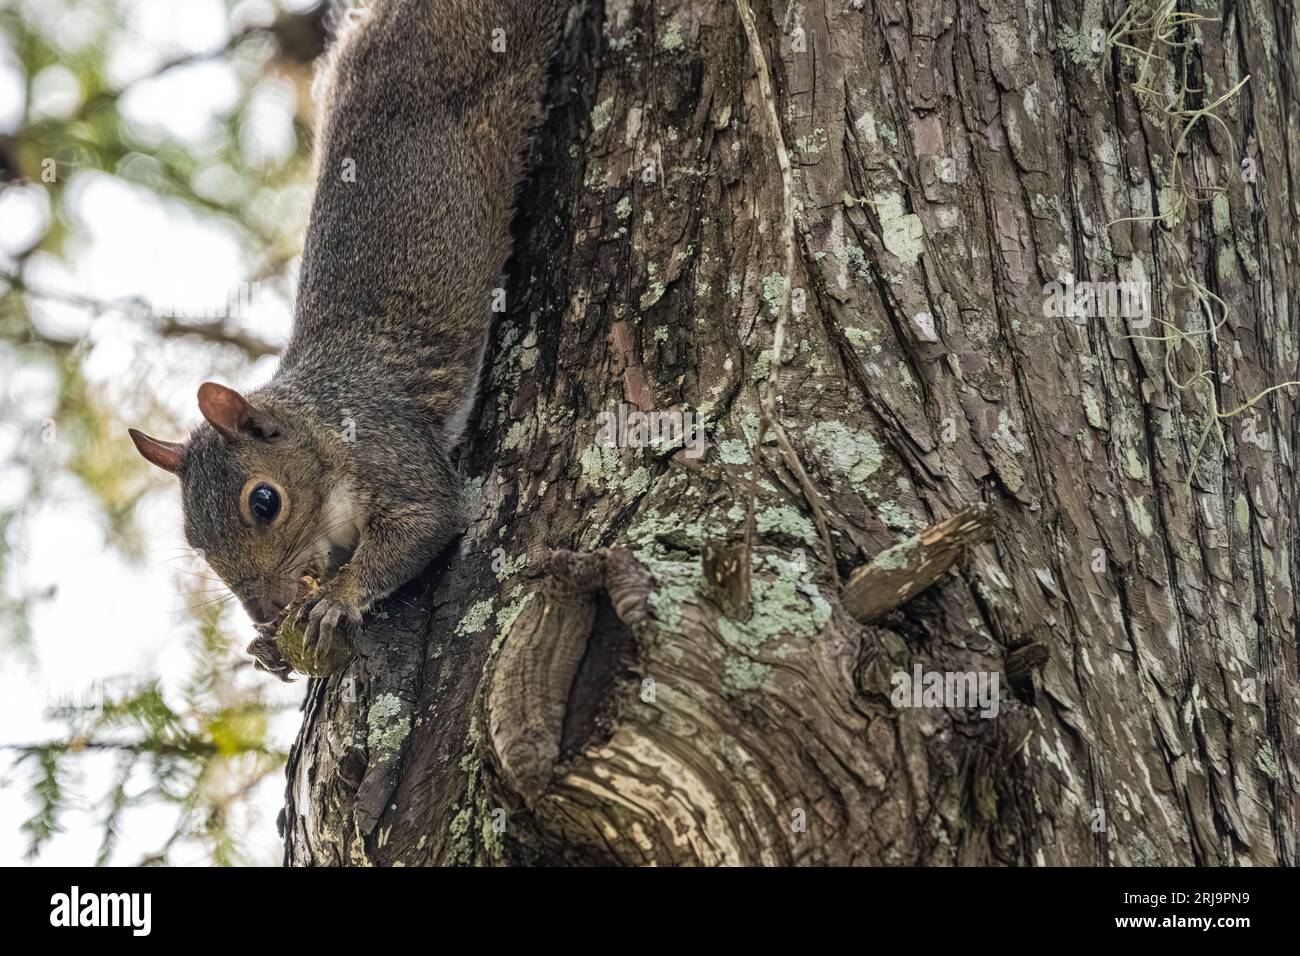 Eastern gray squirrel (Sciurus carolinensis) hanging upside down on a tree trunk eating a nut in Jacksonville, Florida. (USA) Stock Photo